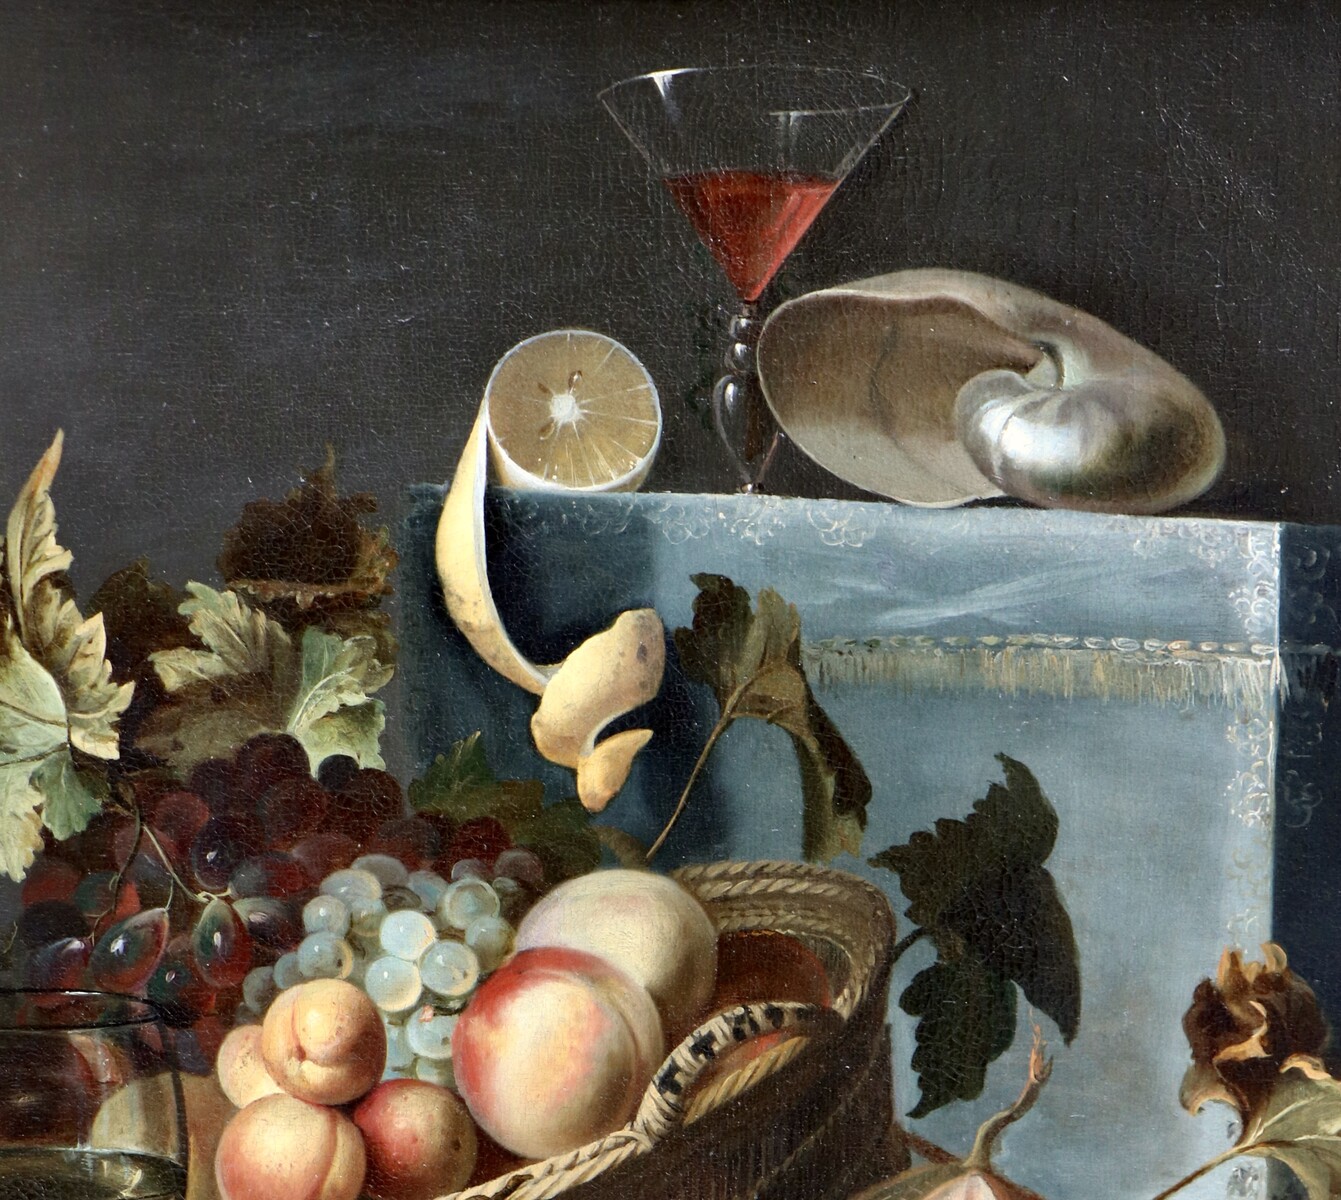 An ornate or Pronk still life